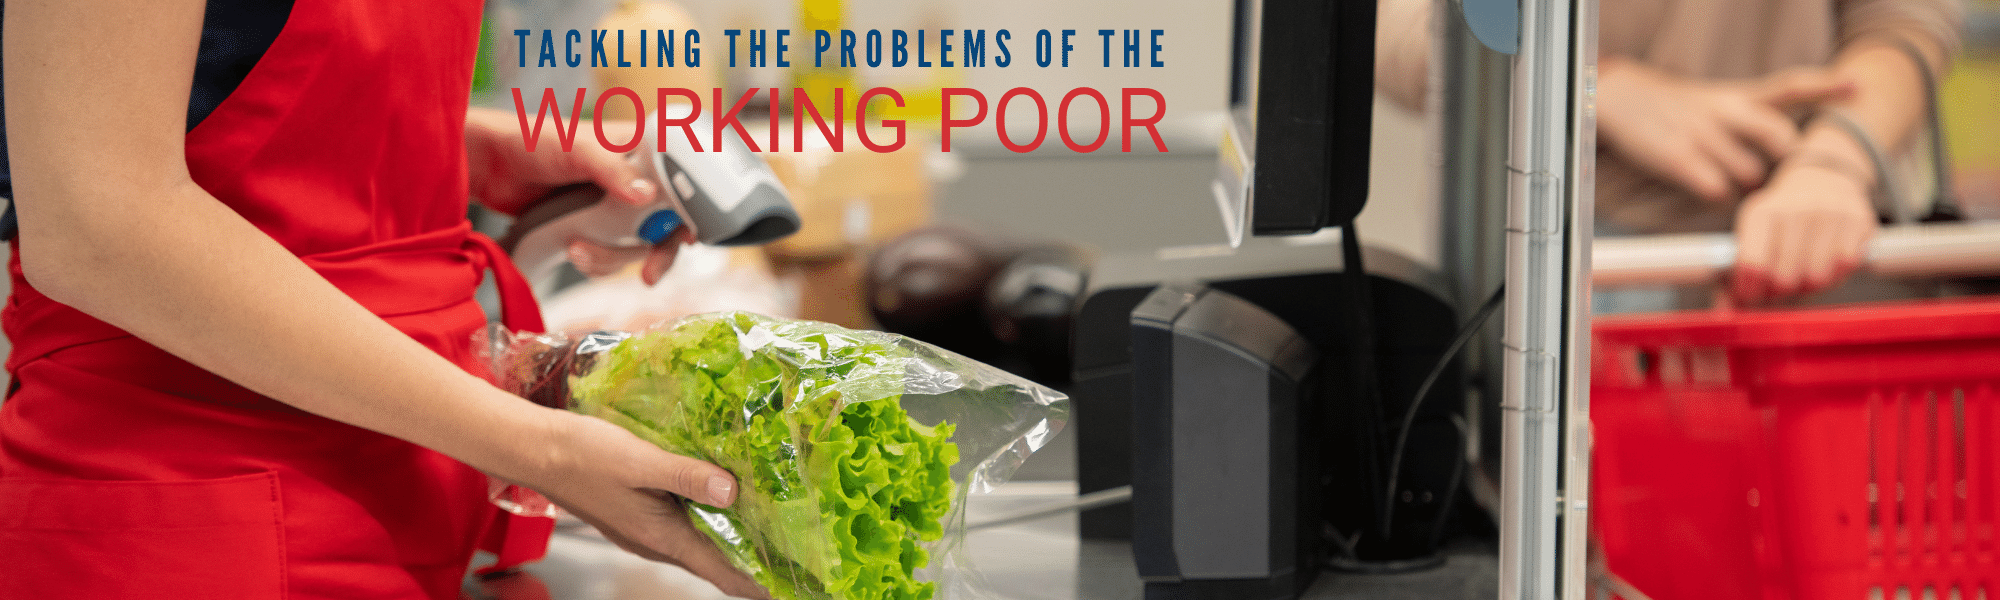 Tackling the problems of the working poor